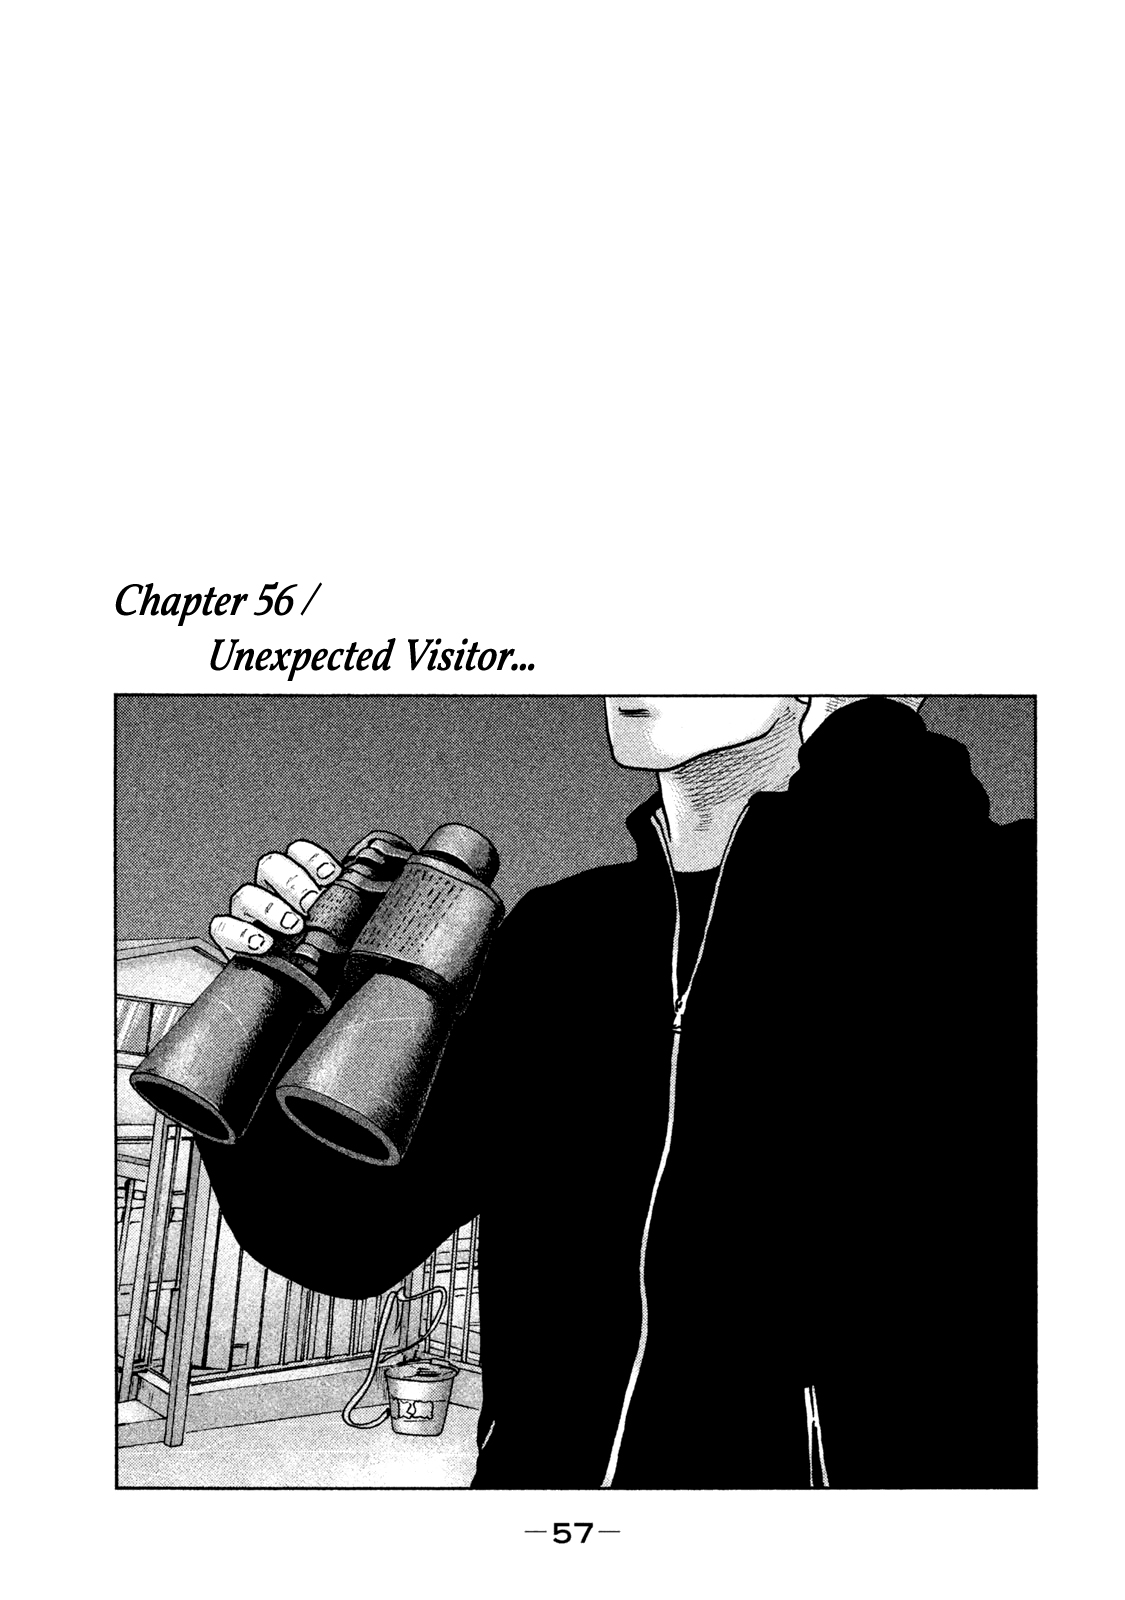 The Fable Vol. 6 Ch. 56 Unexpected Visitor...